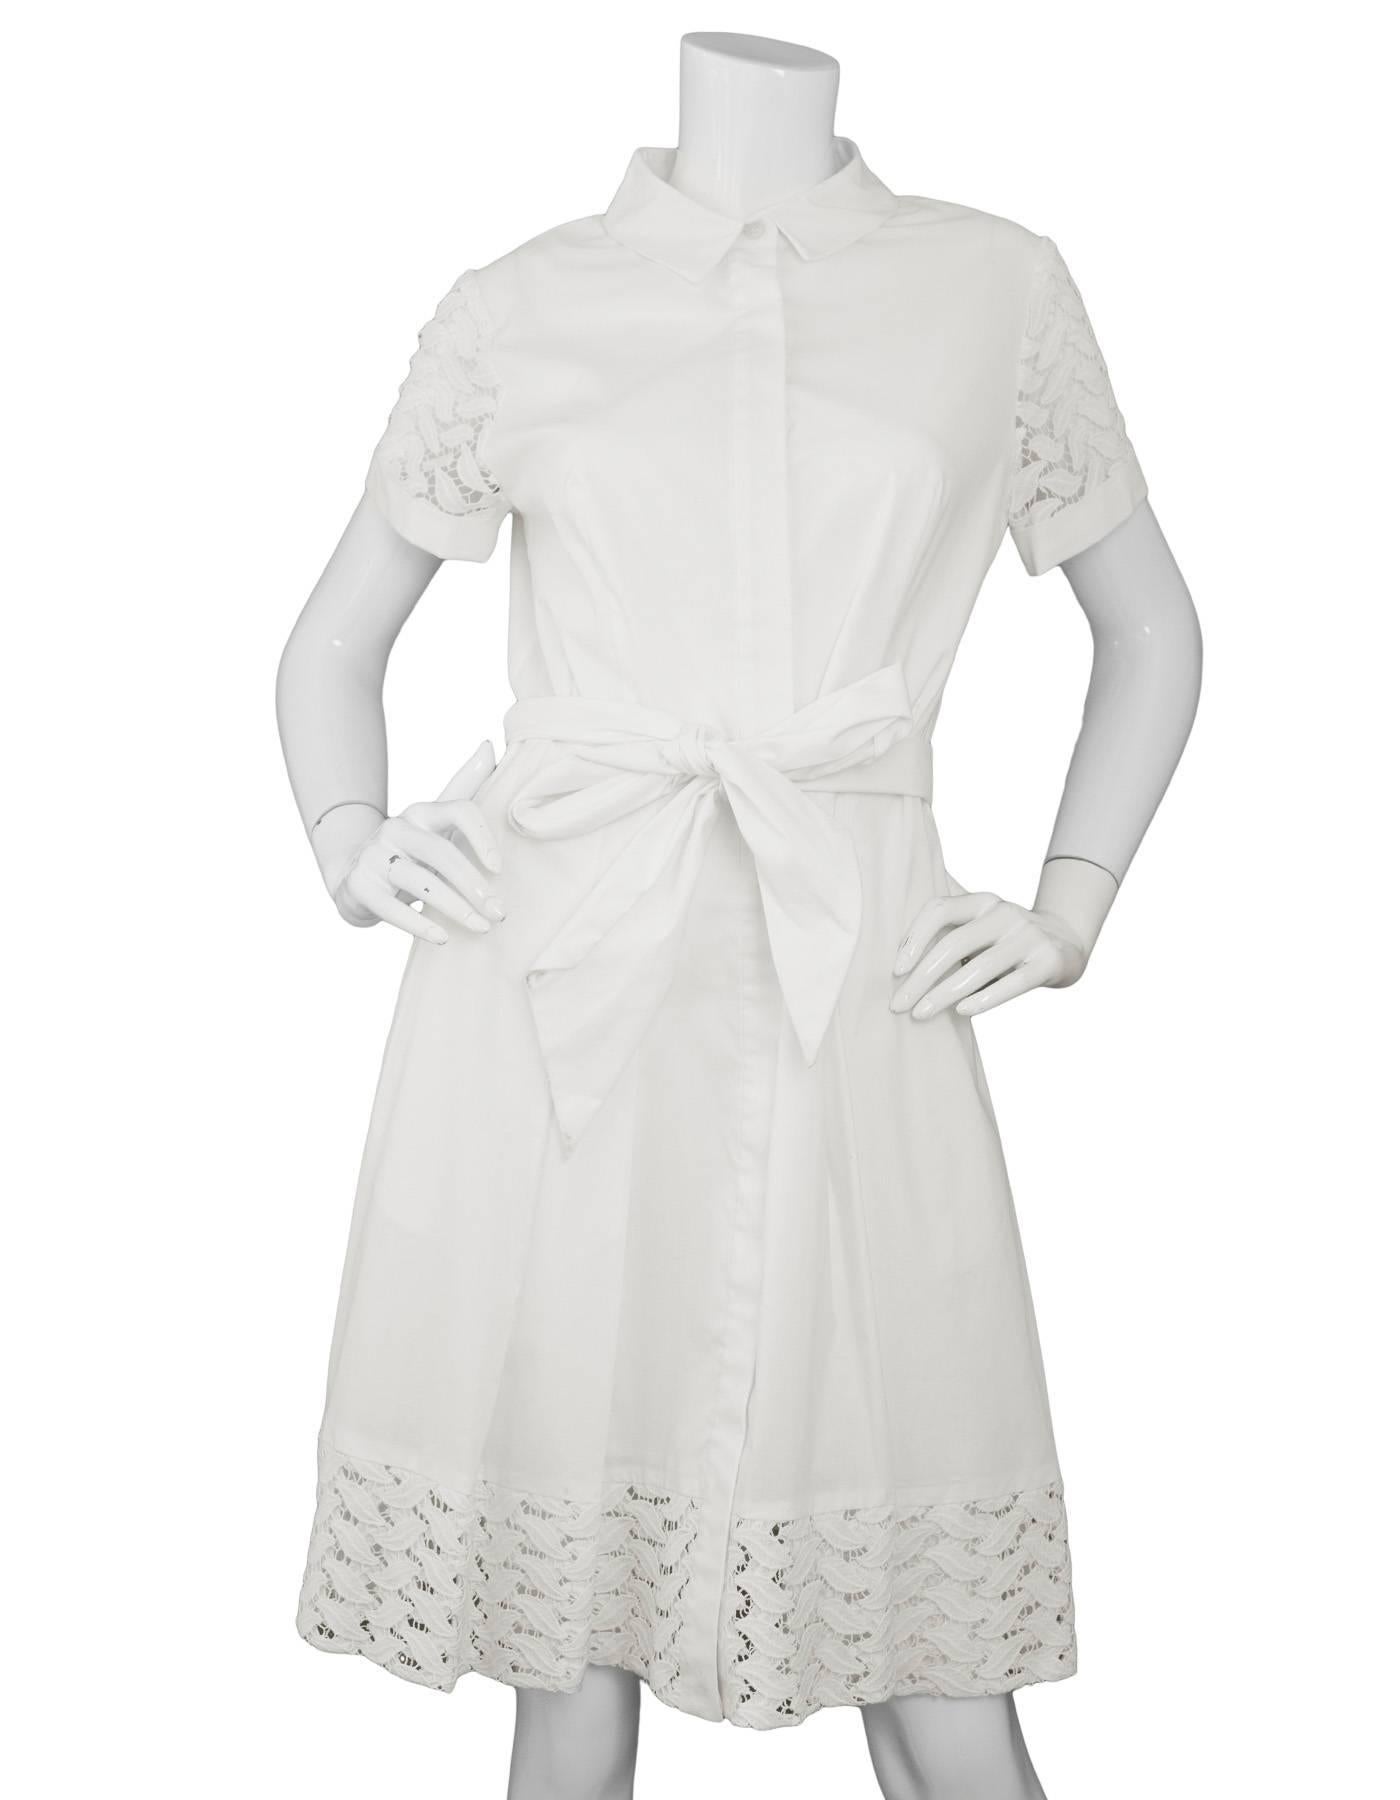 Shoshanna White Shirt Dress Sz 10

Features eyelet sleeves and hem

Made In: USA
Color: White
Composition: 65% cotton, 30% polyester, 5% polyurethane
Lining: white  100% poly stretch
Closure/Opening: Front button closure
Exterior Pockets: